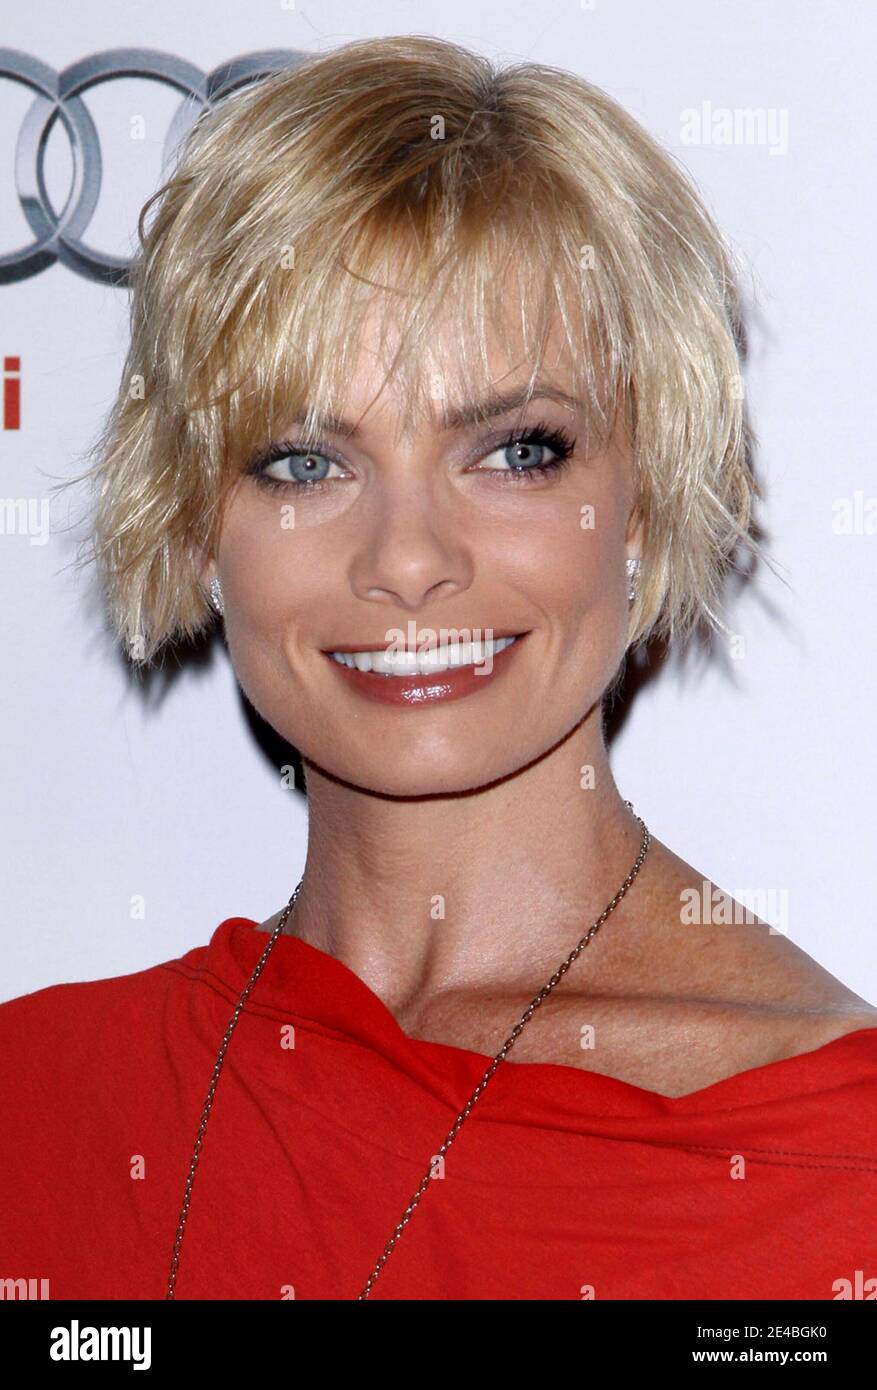 'Jaime Pressly arrives for A Special Screening of ''The September Issue'' held at LACMA in Los Angeles, California, USA on September 08, 2009. Photo by Tony DiMaio/ABACAPRESS.COM (Pictured: Jaime Pressly)' Stock Photo